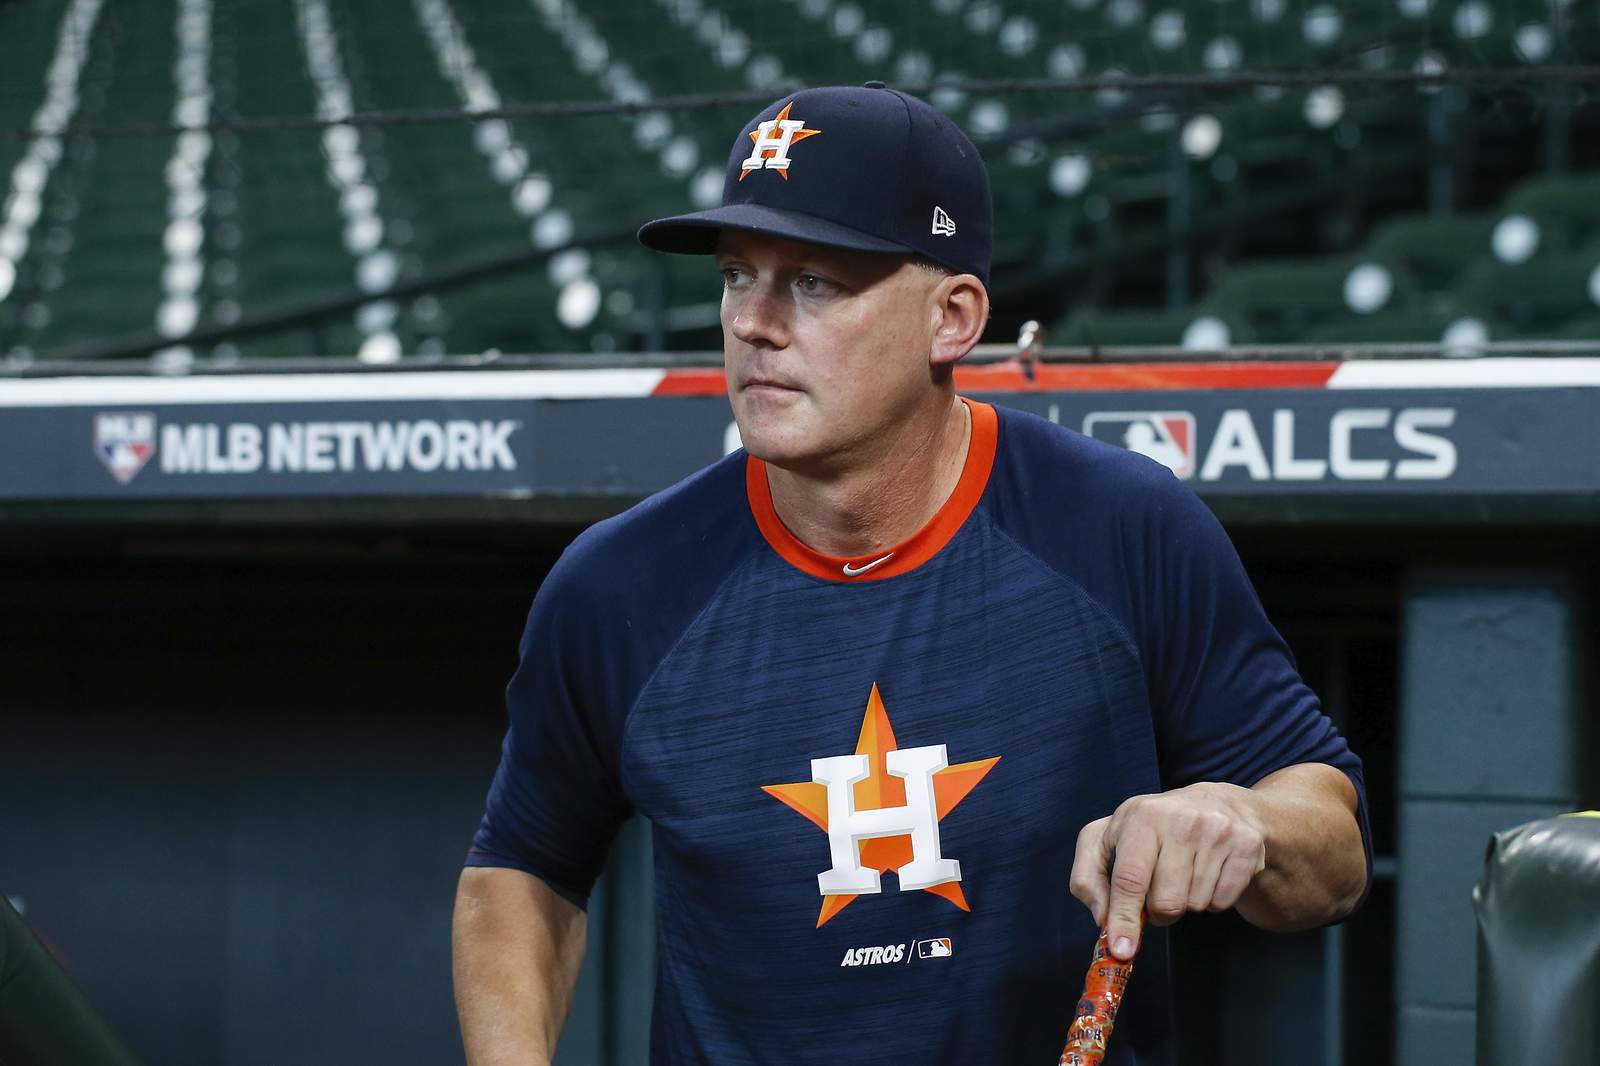 Detroit Tigers hire former Houston Astros manager A.J. Hinch to same position